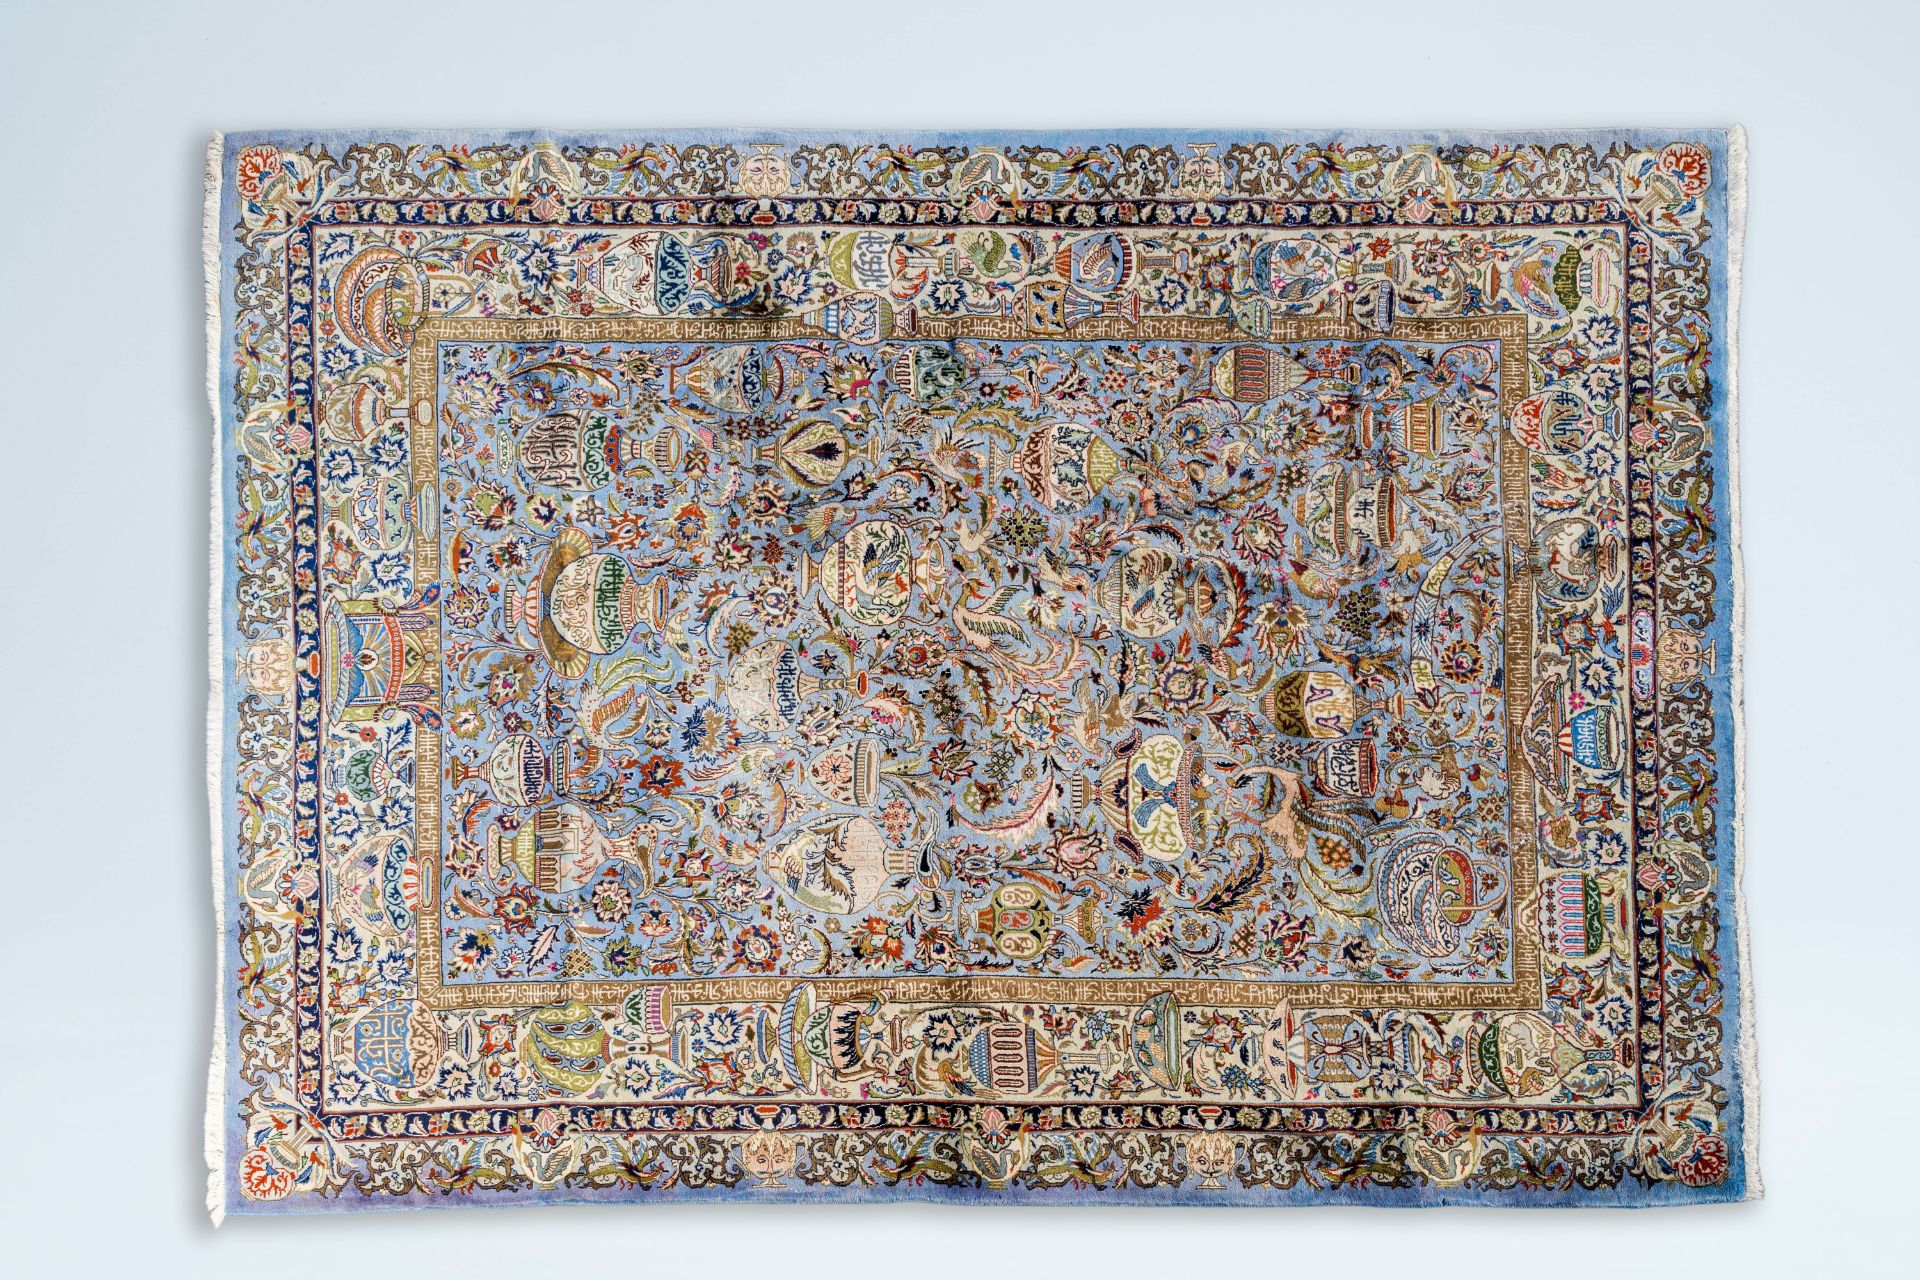 A large Iranian Kashmir rug with antiquities, animals and floral design, wool on cotton, 20th C.